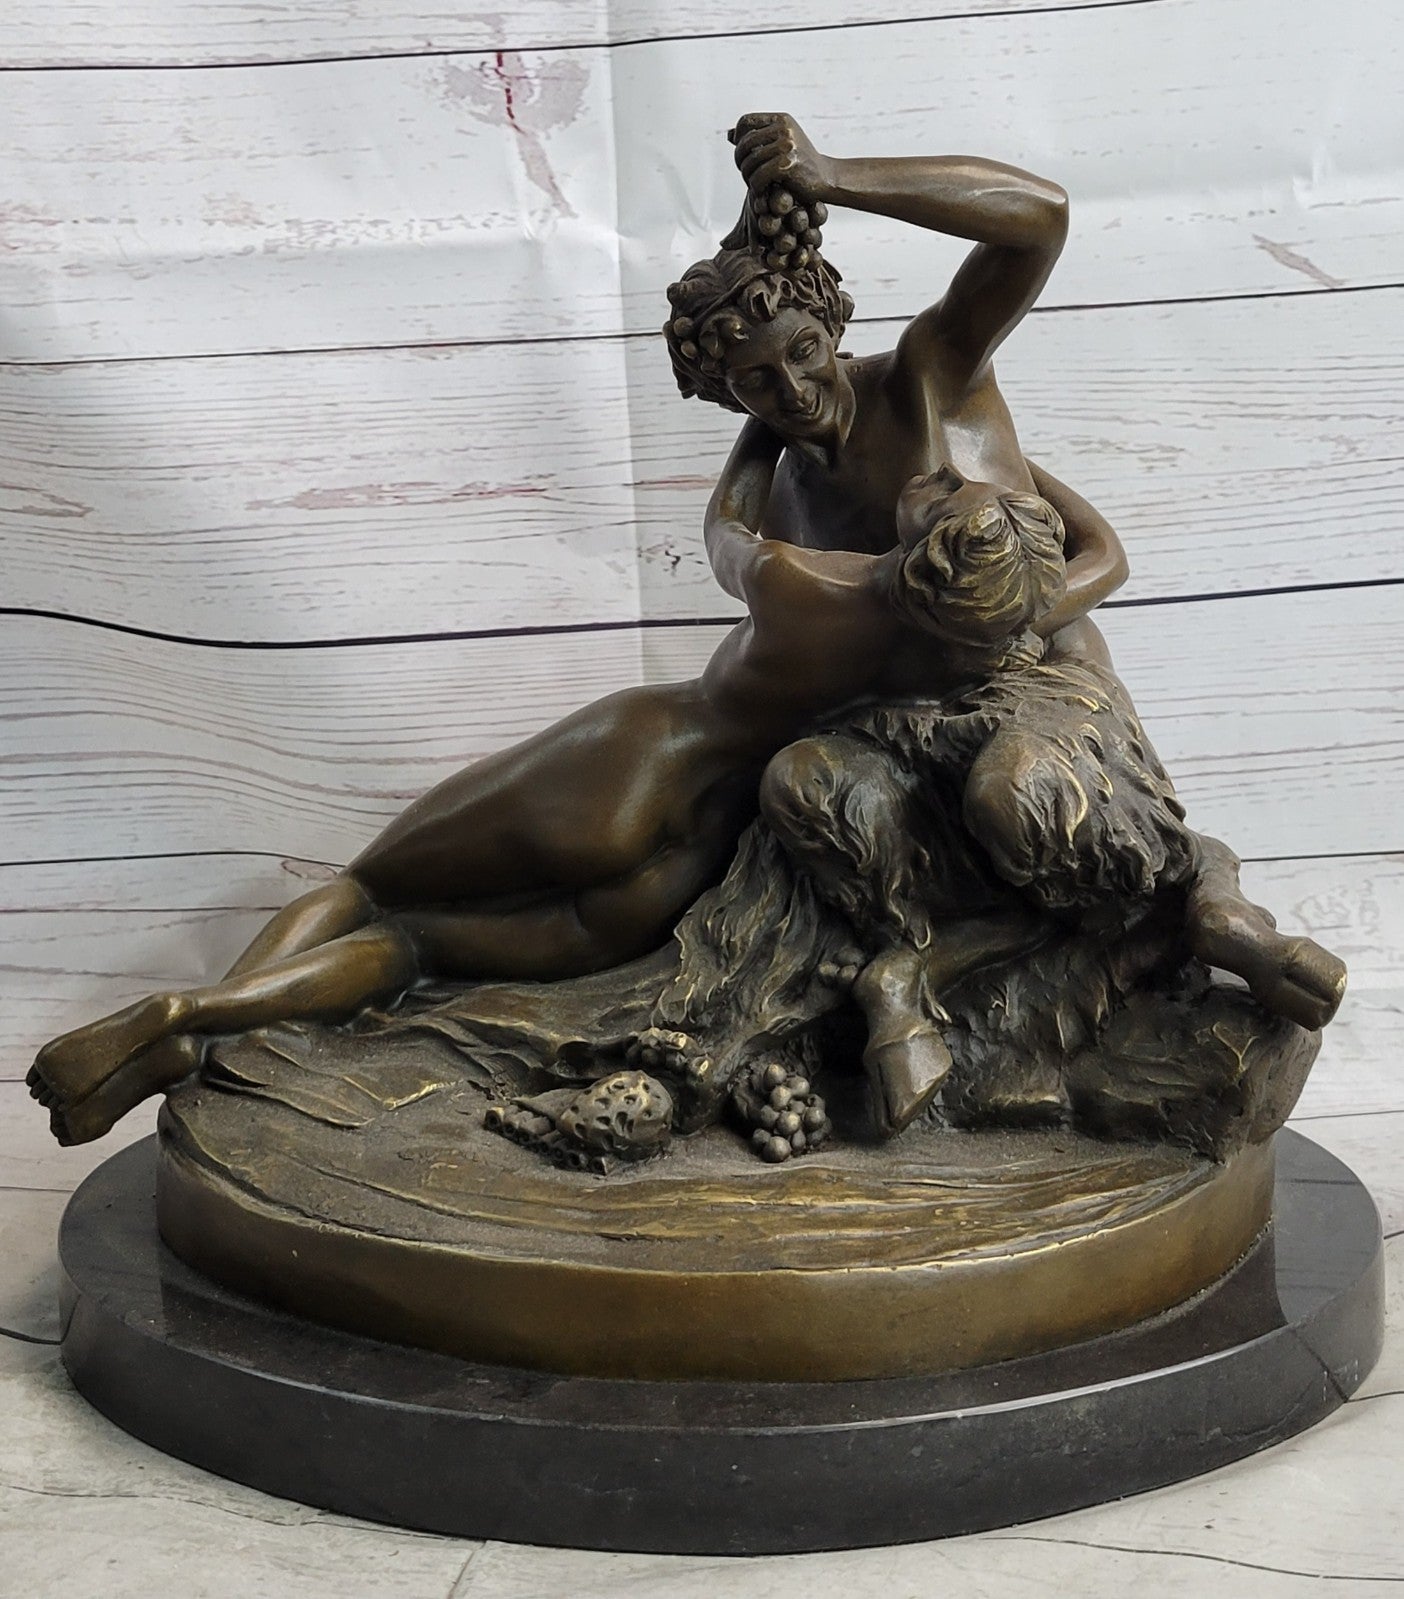 Collectible Bronze Figurine: Mythical Faun Seducing Naked Woman, Signed Milo